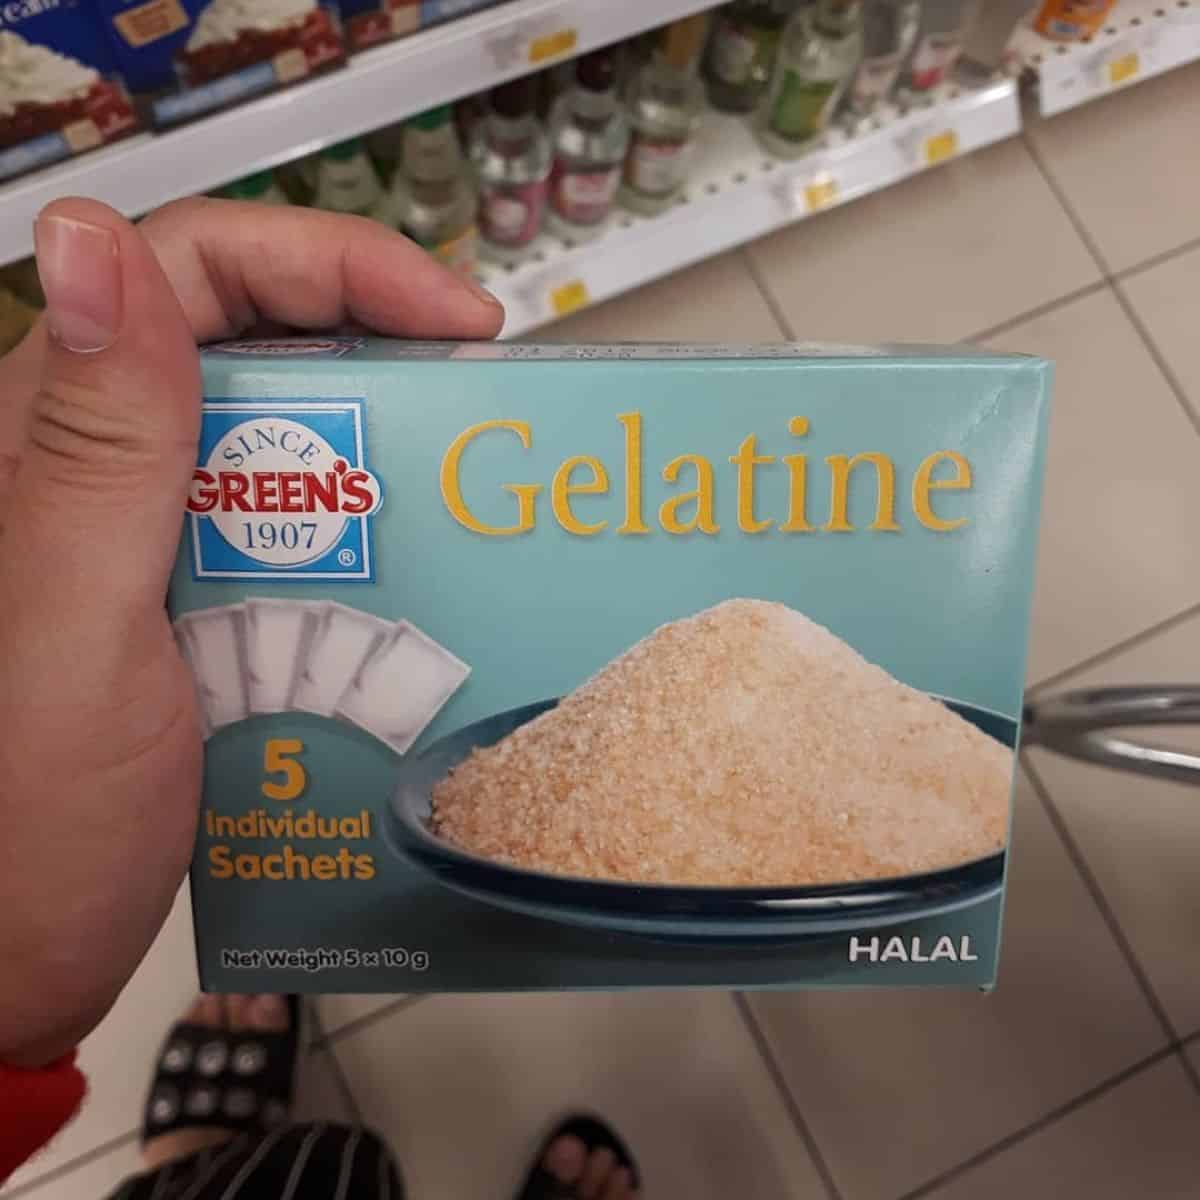 Gelatin powder in a small box as an ingredient for lychee jelly recipe